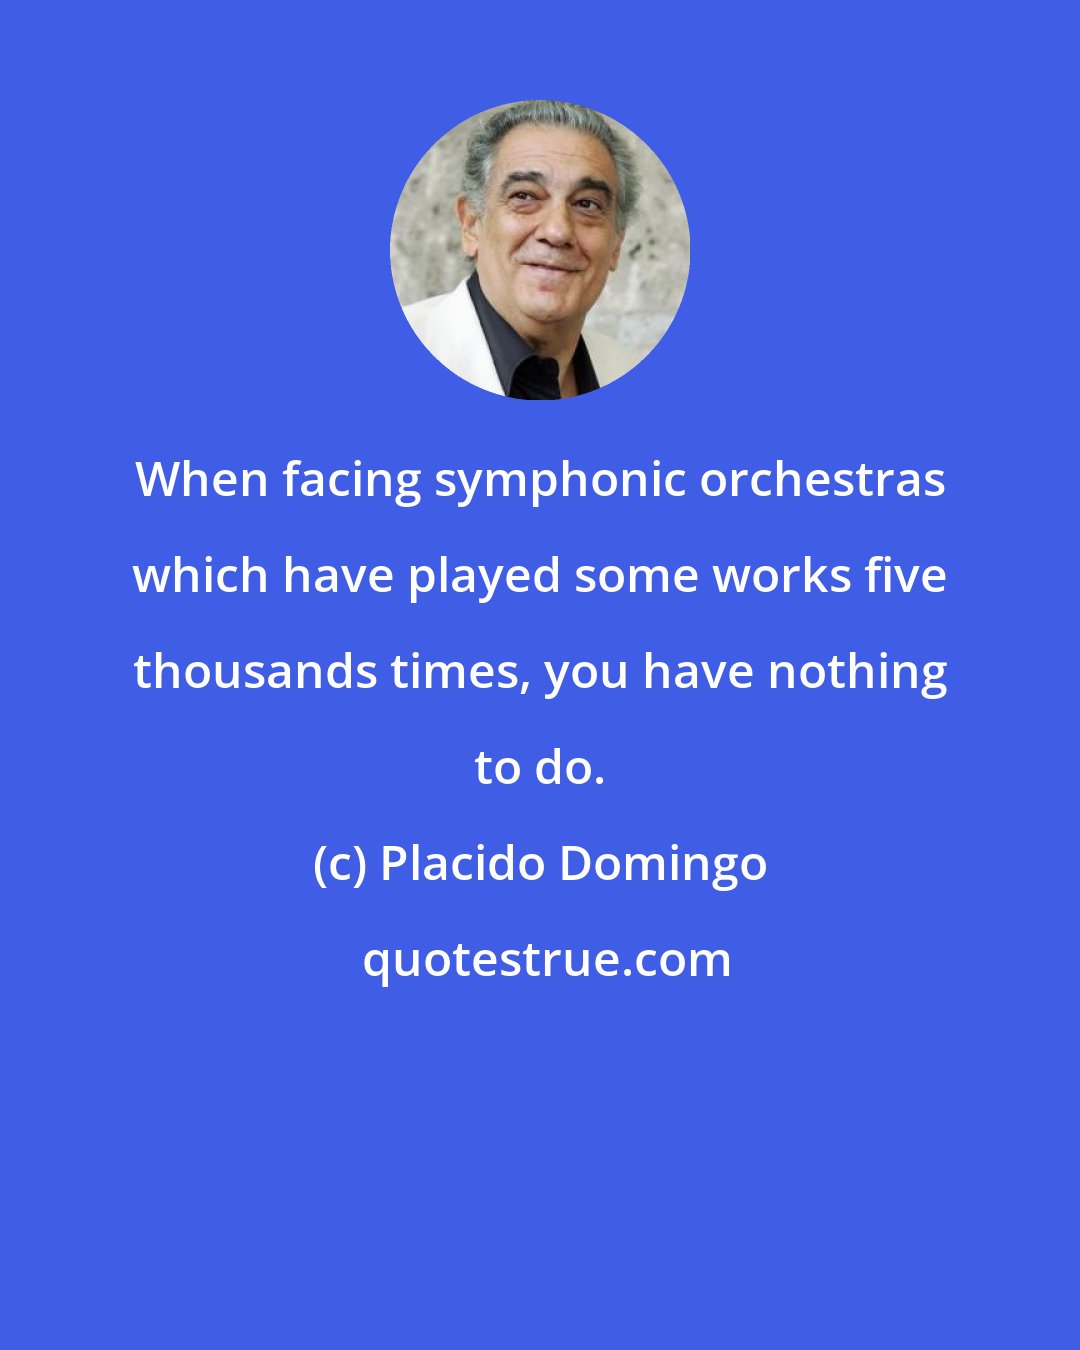 Placido Domingo: When facing symphonic orchestras which have played some works five thousands times, you have nothing to do.